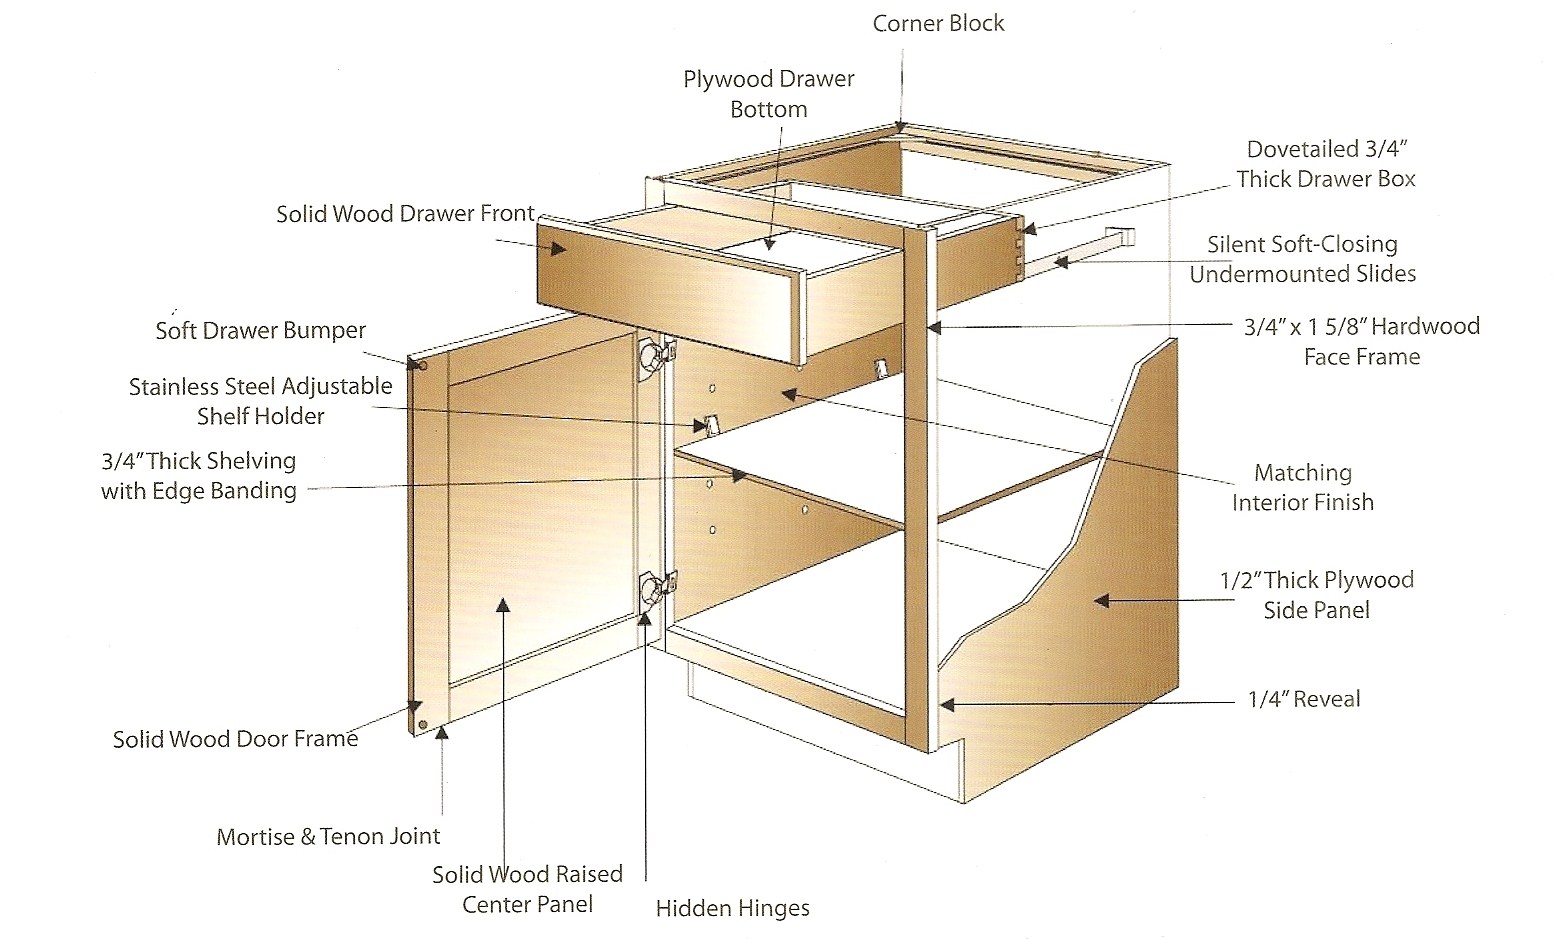 CabinetStructure